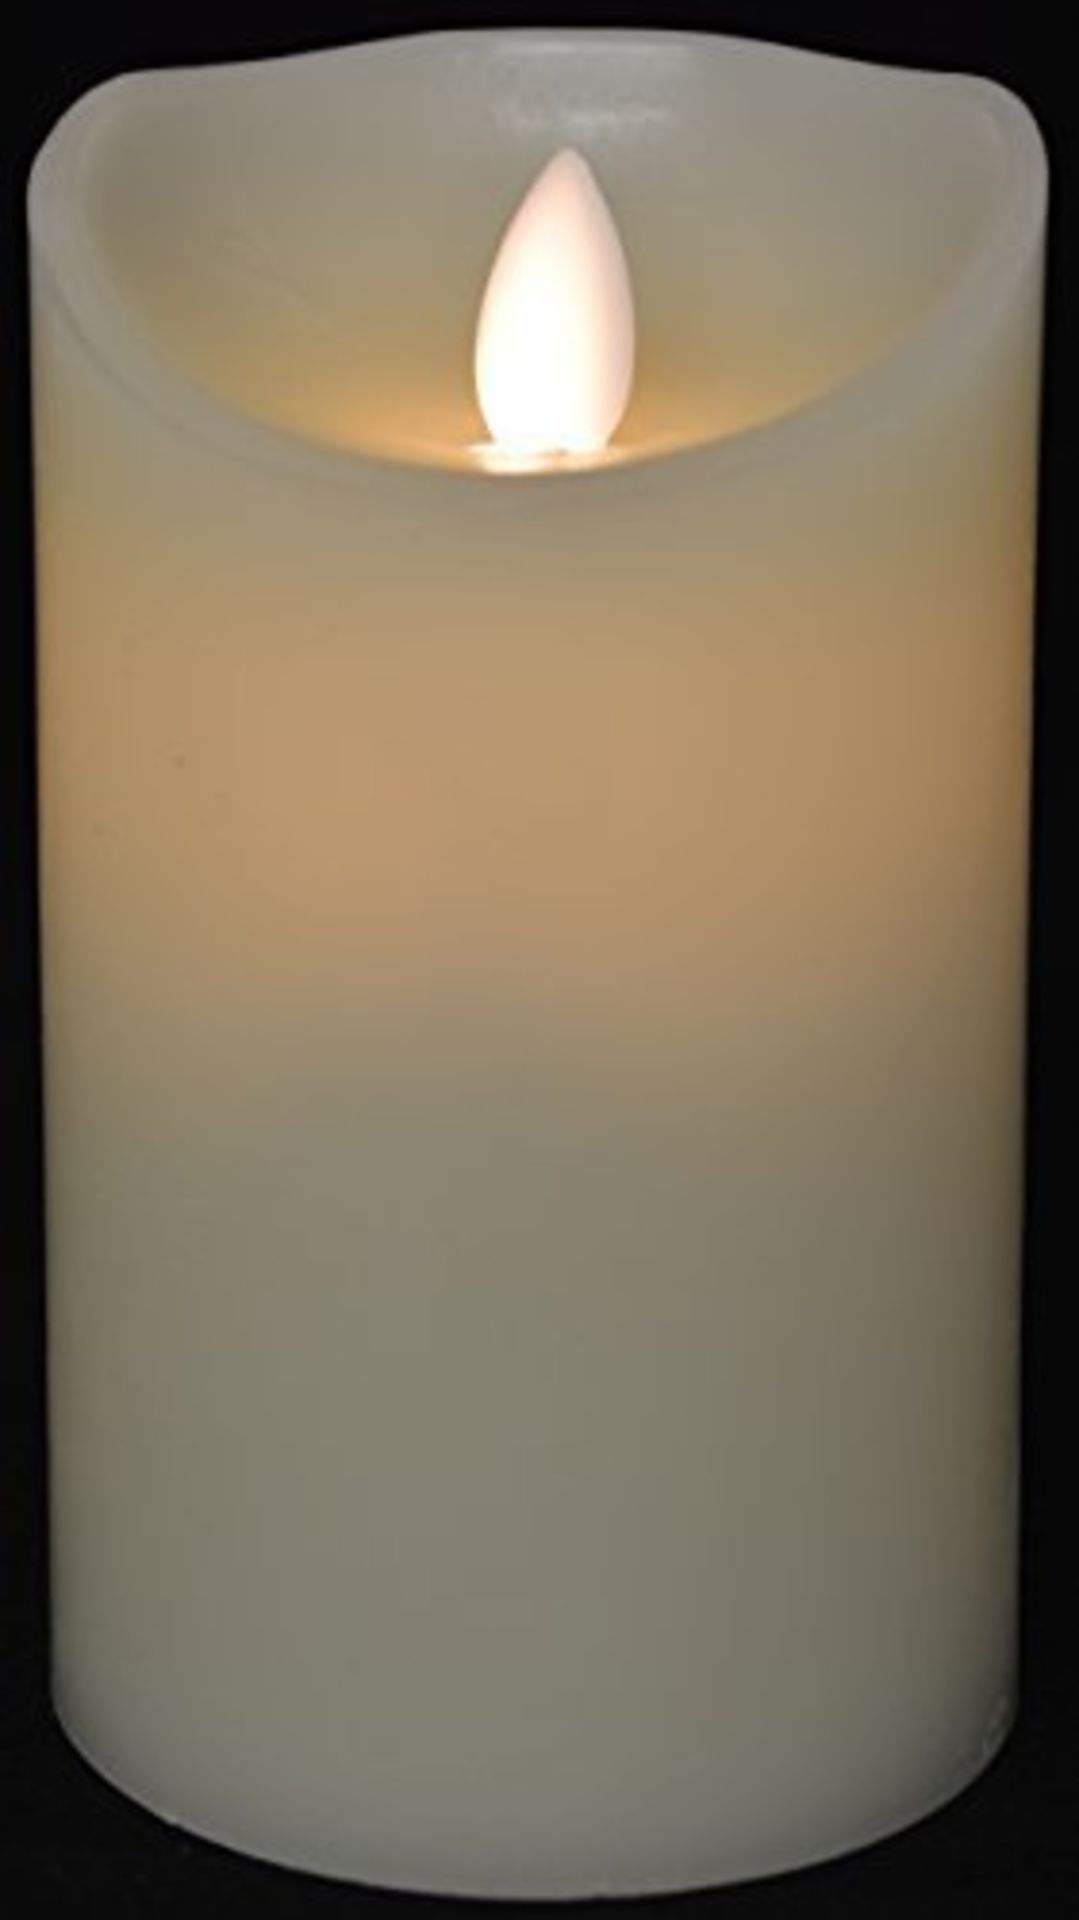 V Brand New Amazing Flickering Flame Candle - Everlasting - Does Not Burn Away! - LED Bulb - Made